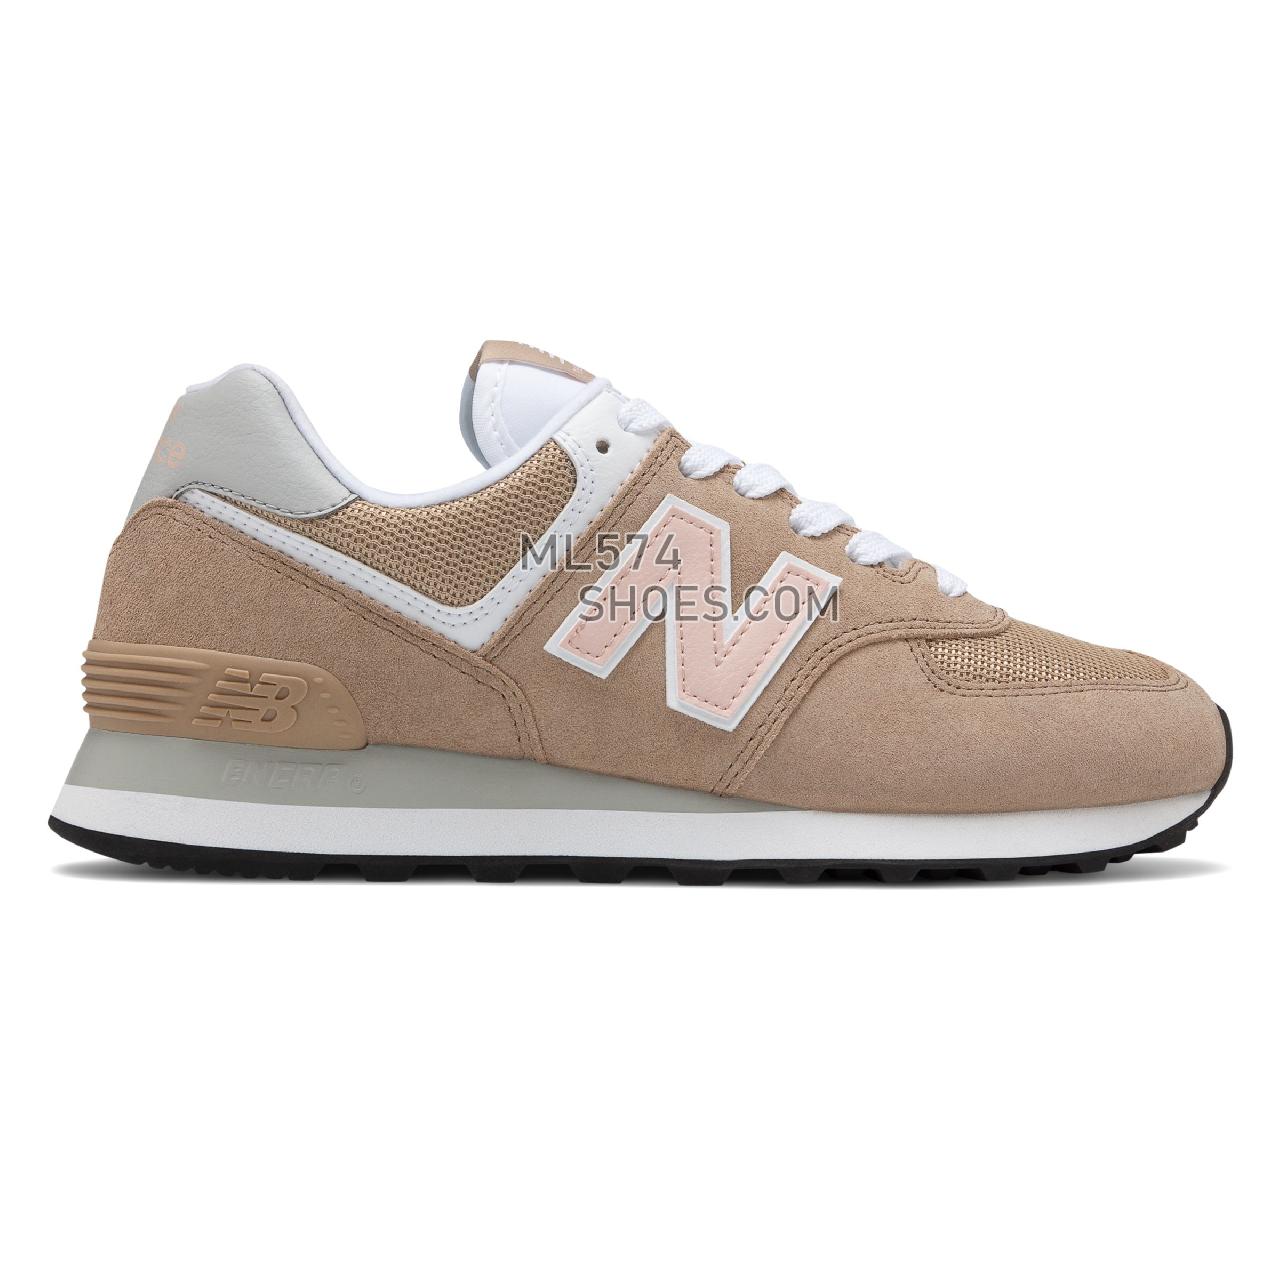 New Balance 574 - Women's Classic Sneakers - Hemp with Oyster Pink - WL574BTB